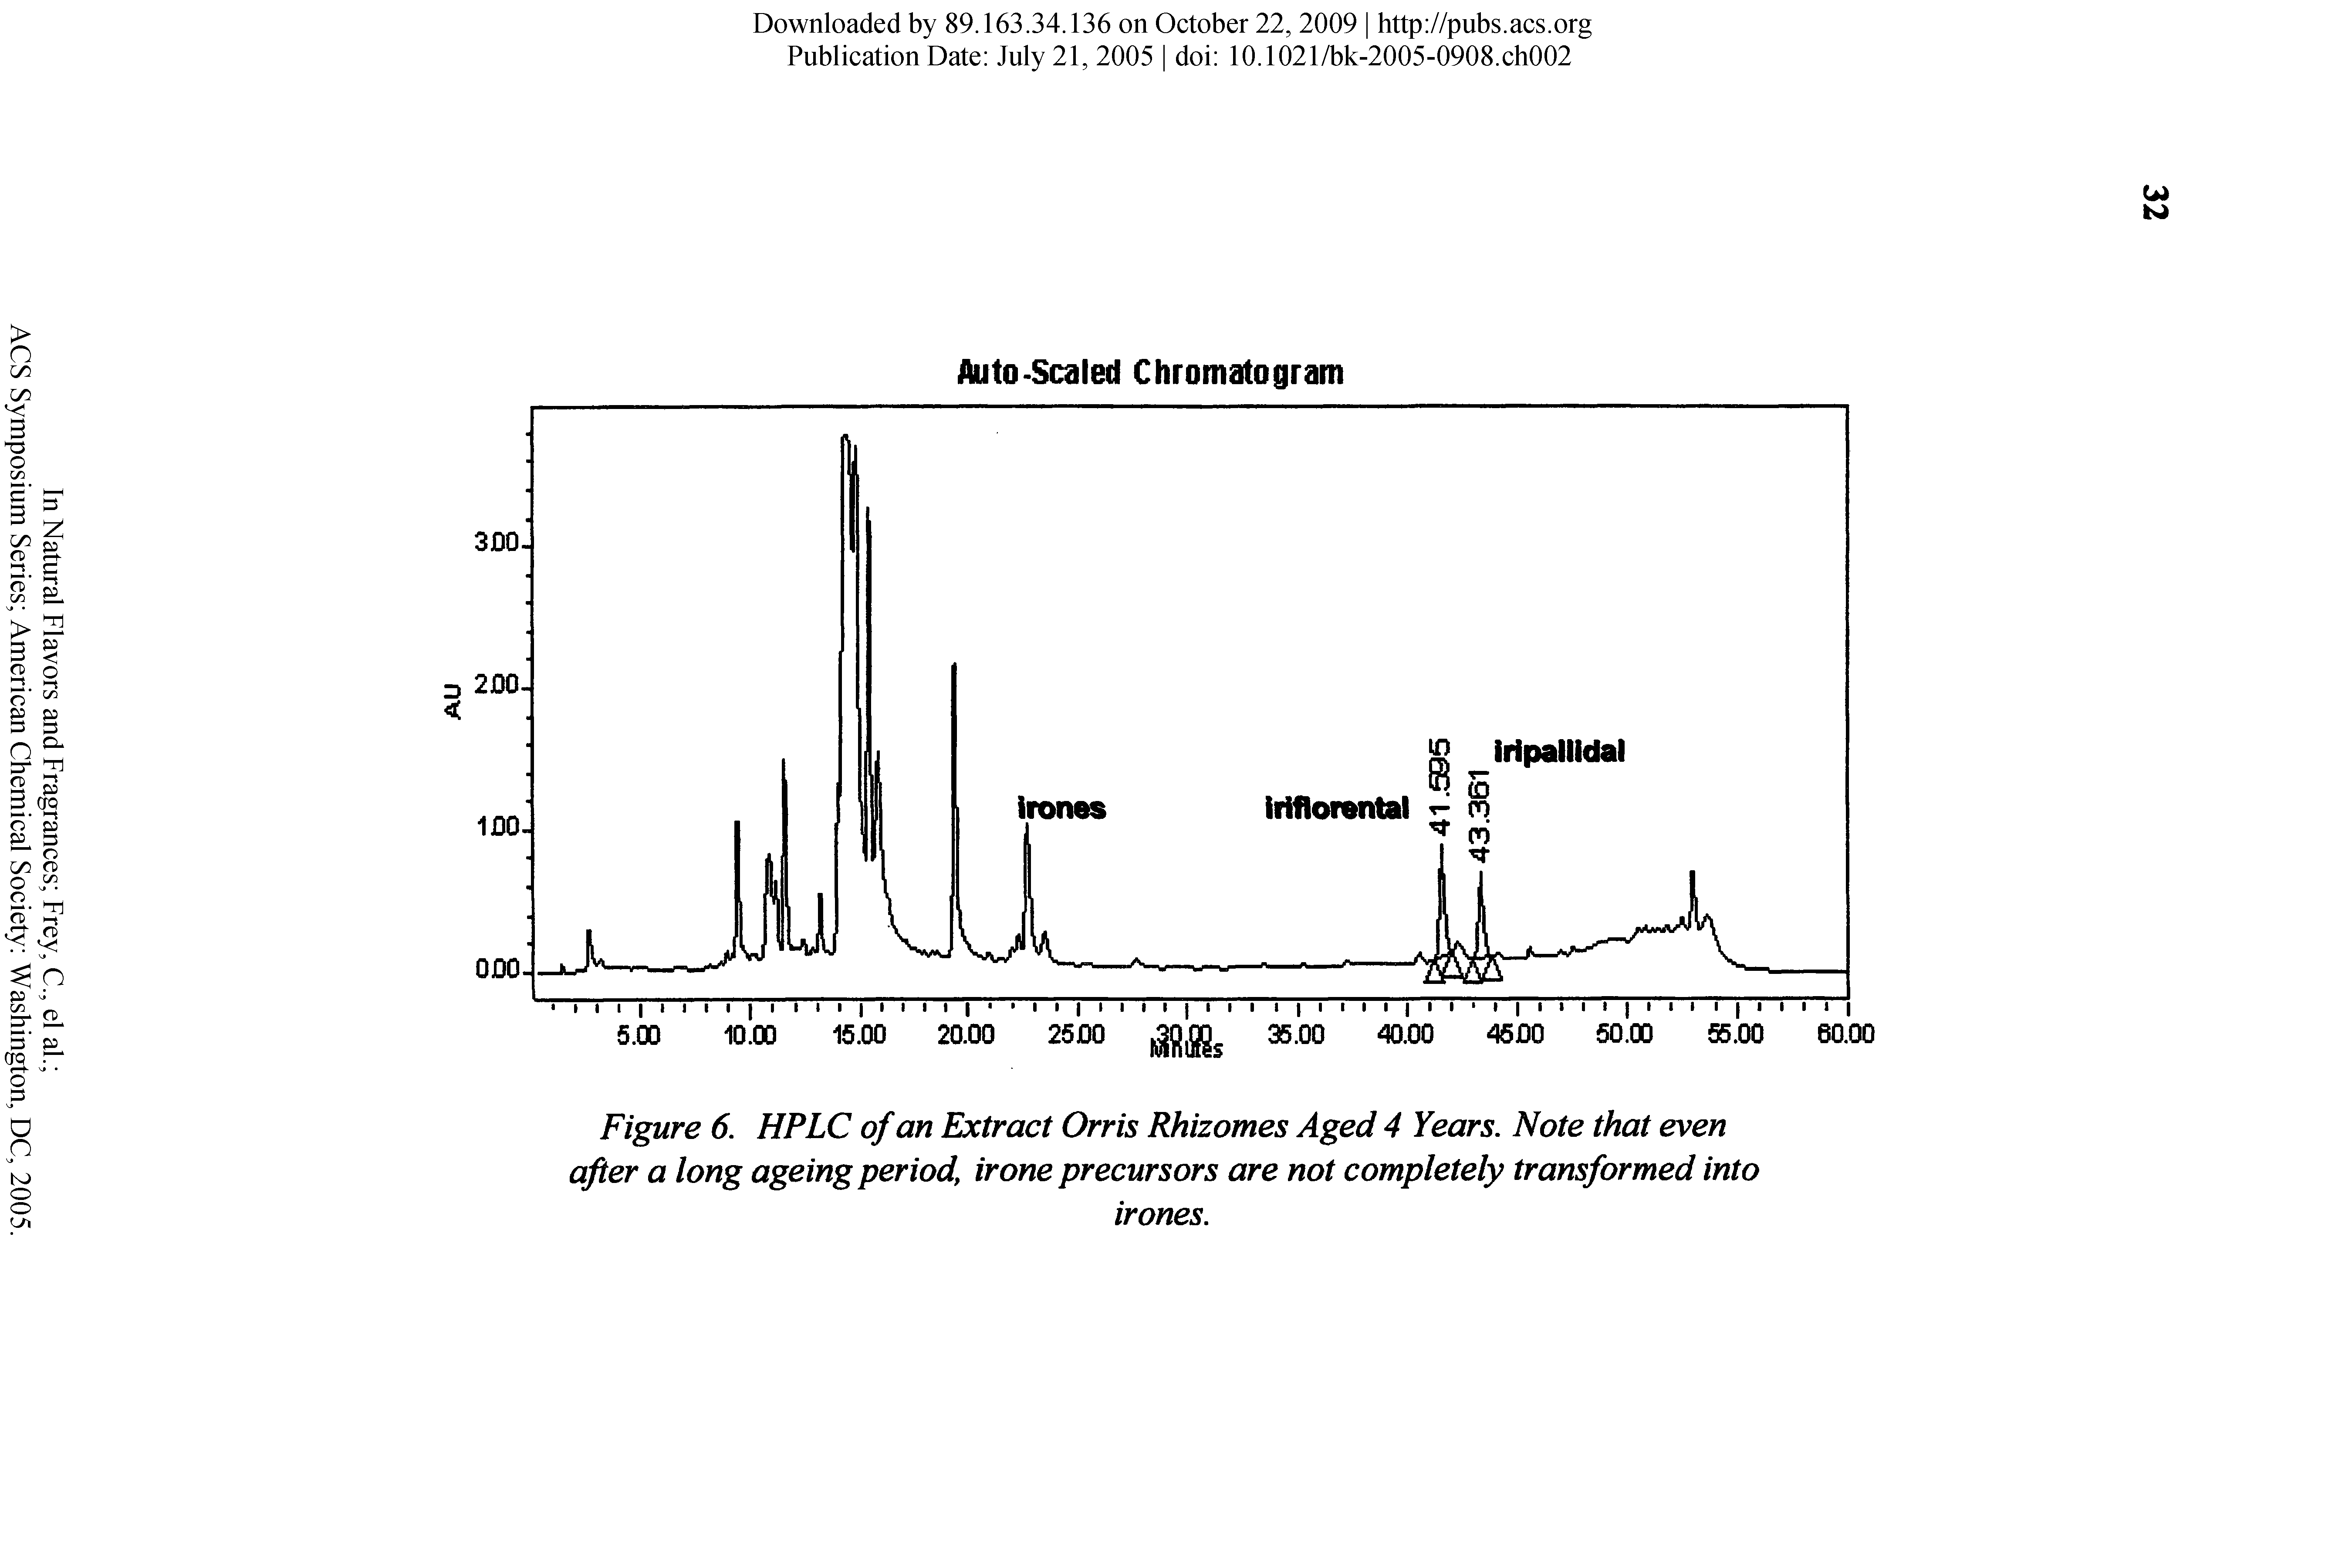 Figure 6. HPLC of an Extract Orris Rhizomes Aged 4 Years. Note that even after a long ageing period, irone precursors are not completely transformed into...